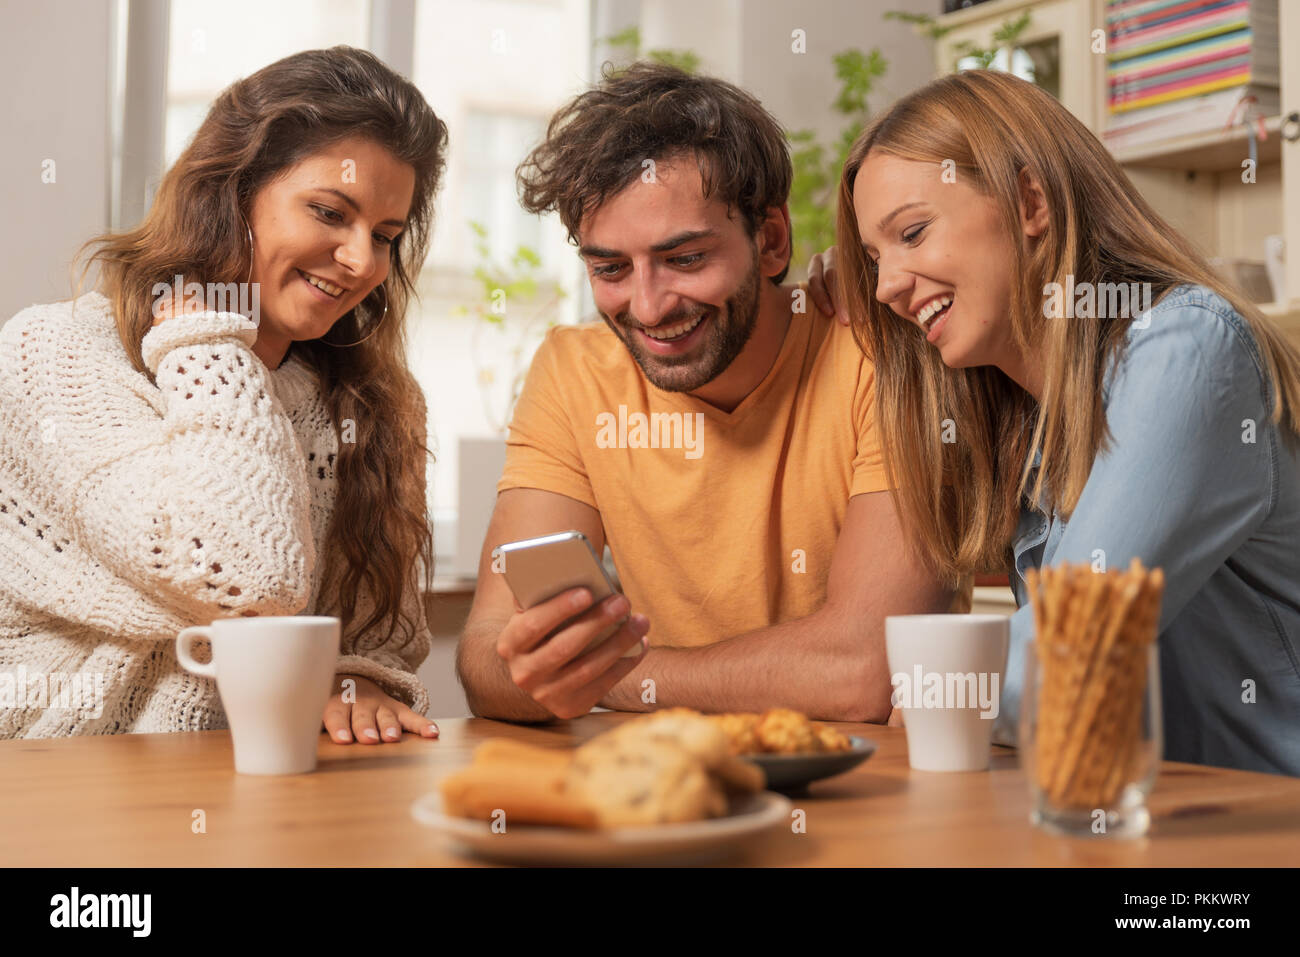 Group of friends having fun with smartphone. Social media, leisure, content sharing, watching funny internet videos. Stock Photo